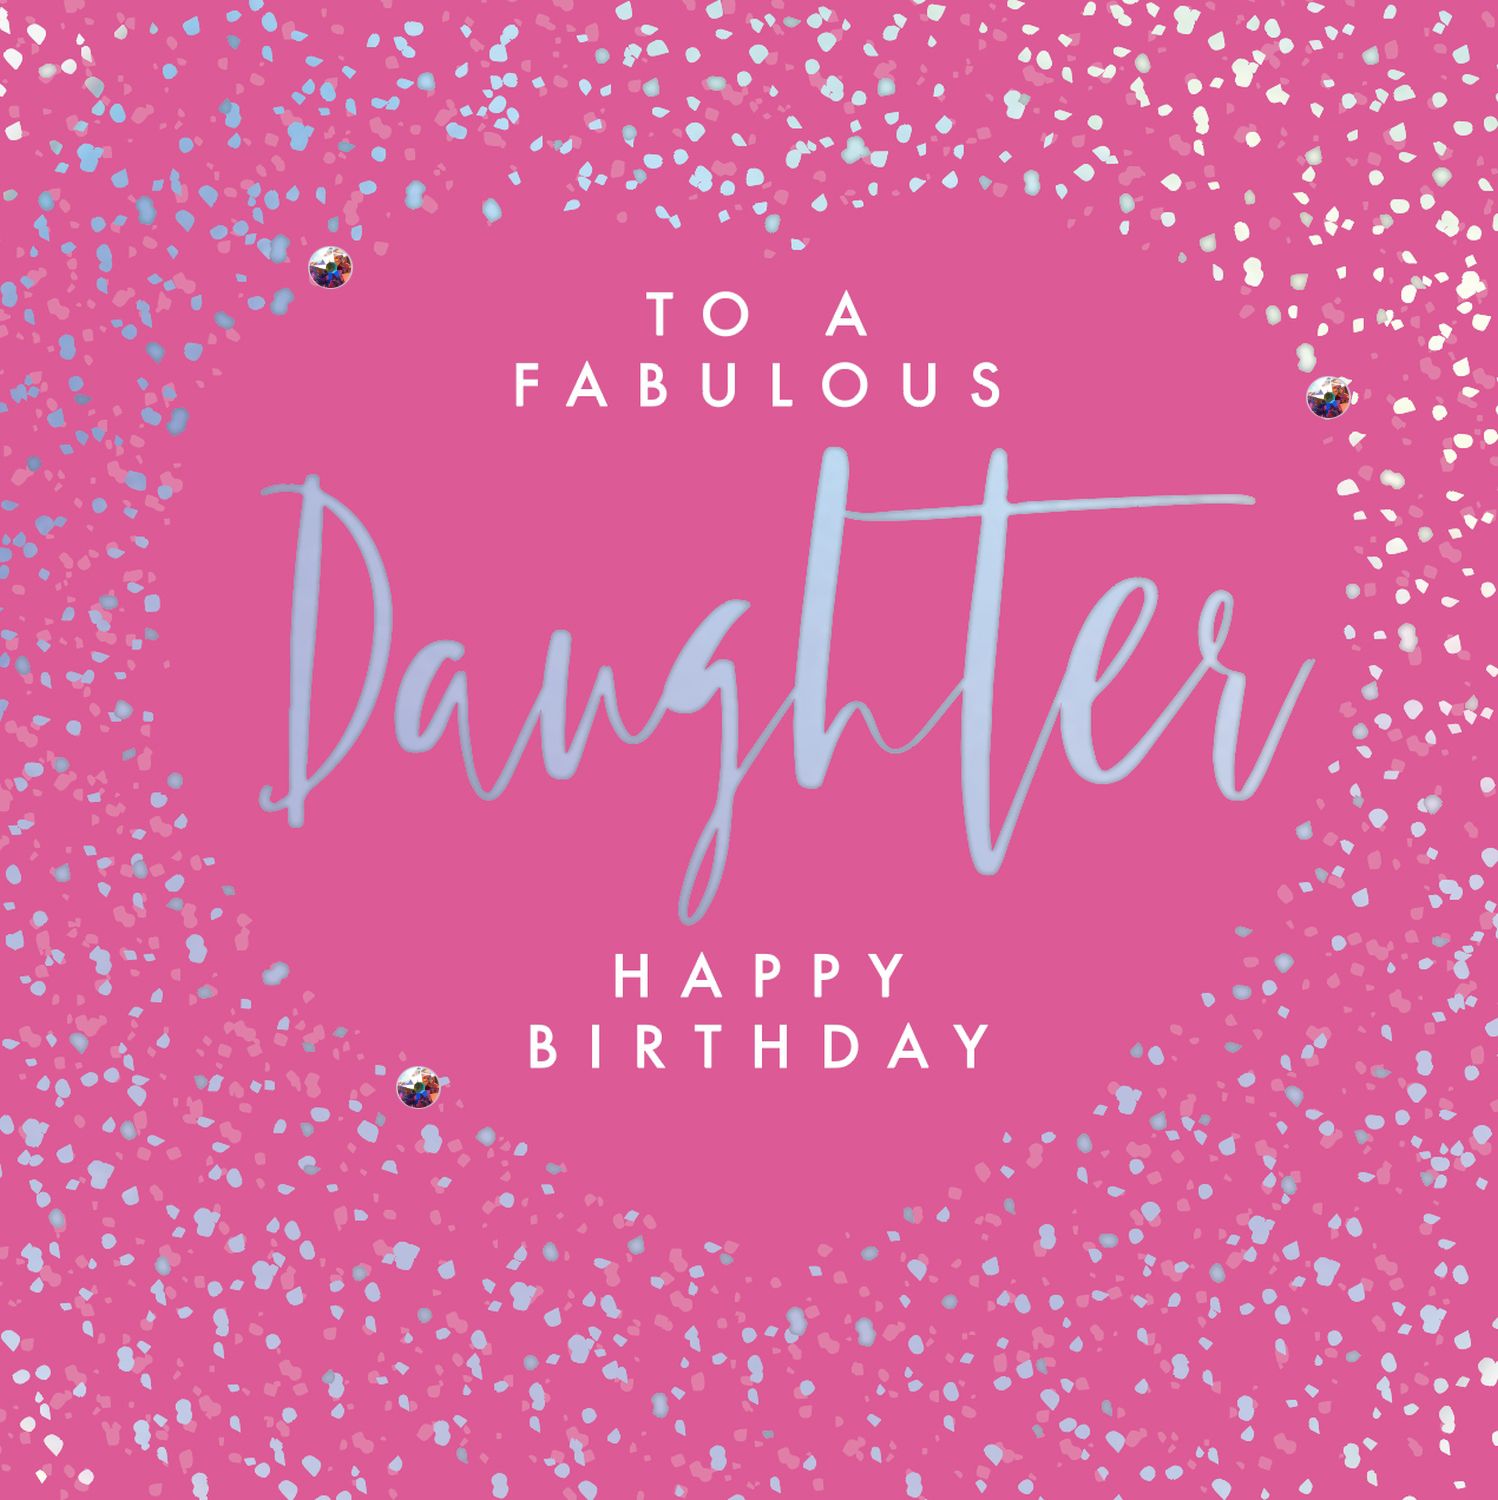 daughter-cards-greetings-from-friends-pinterest-daughters